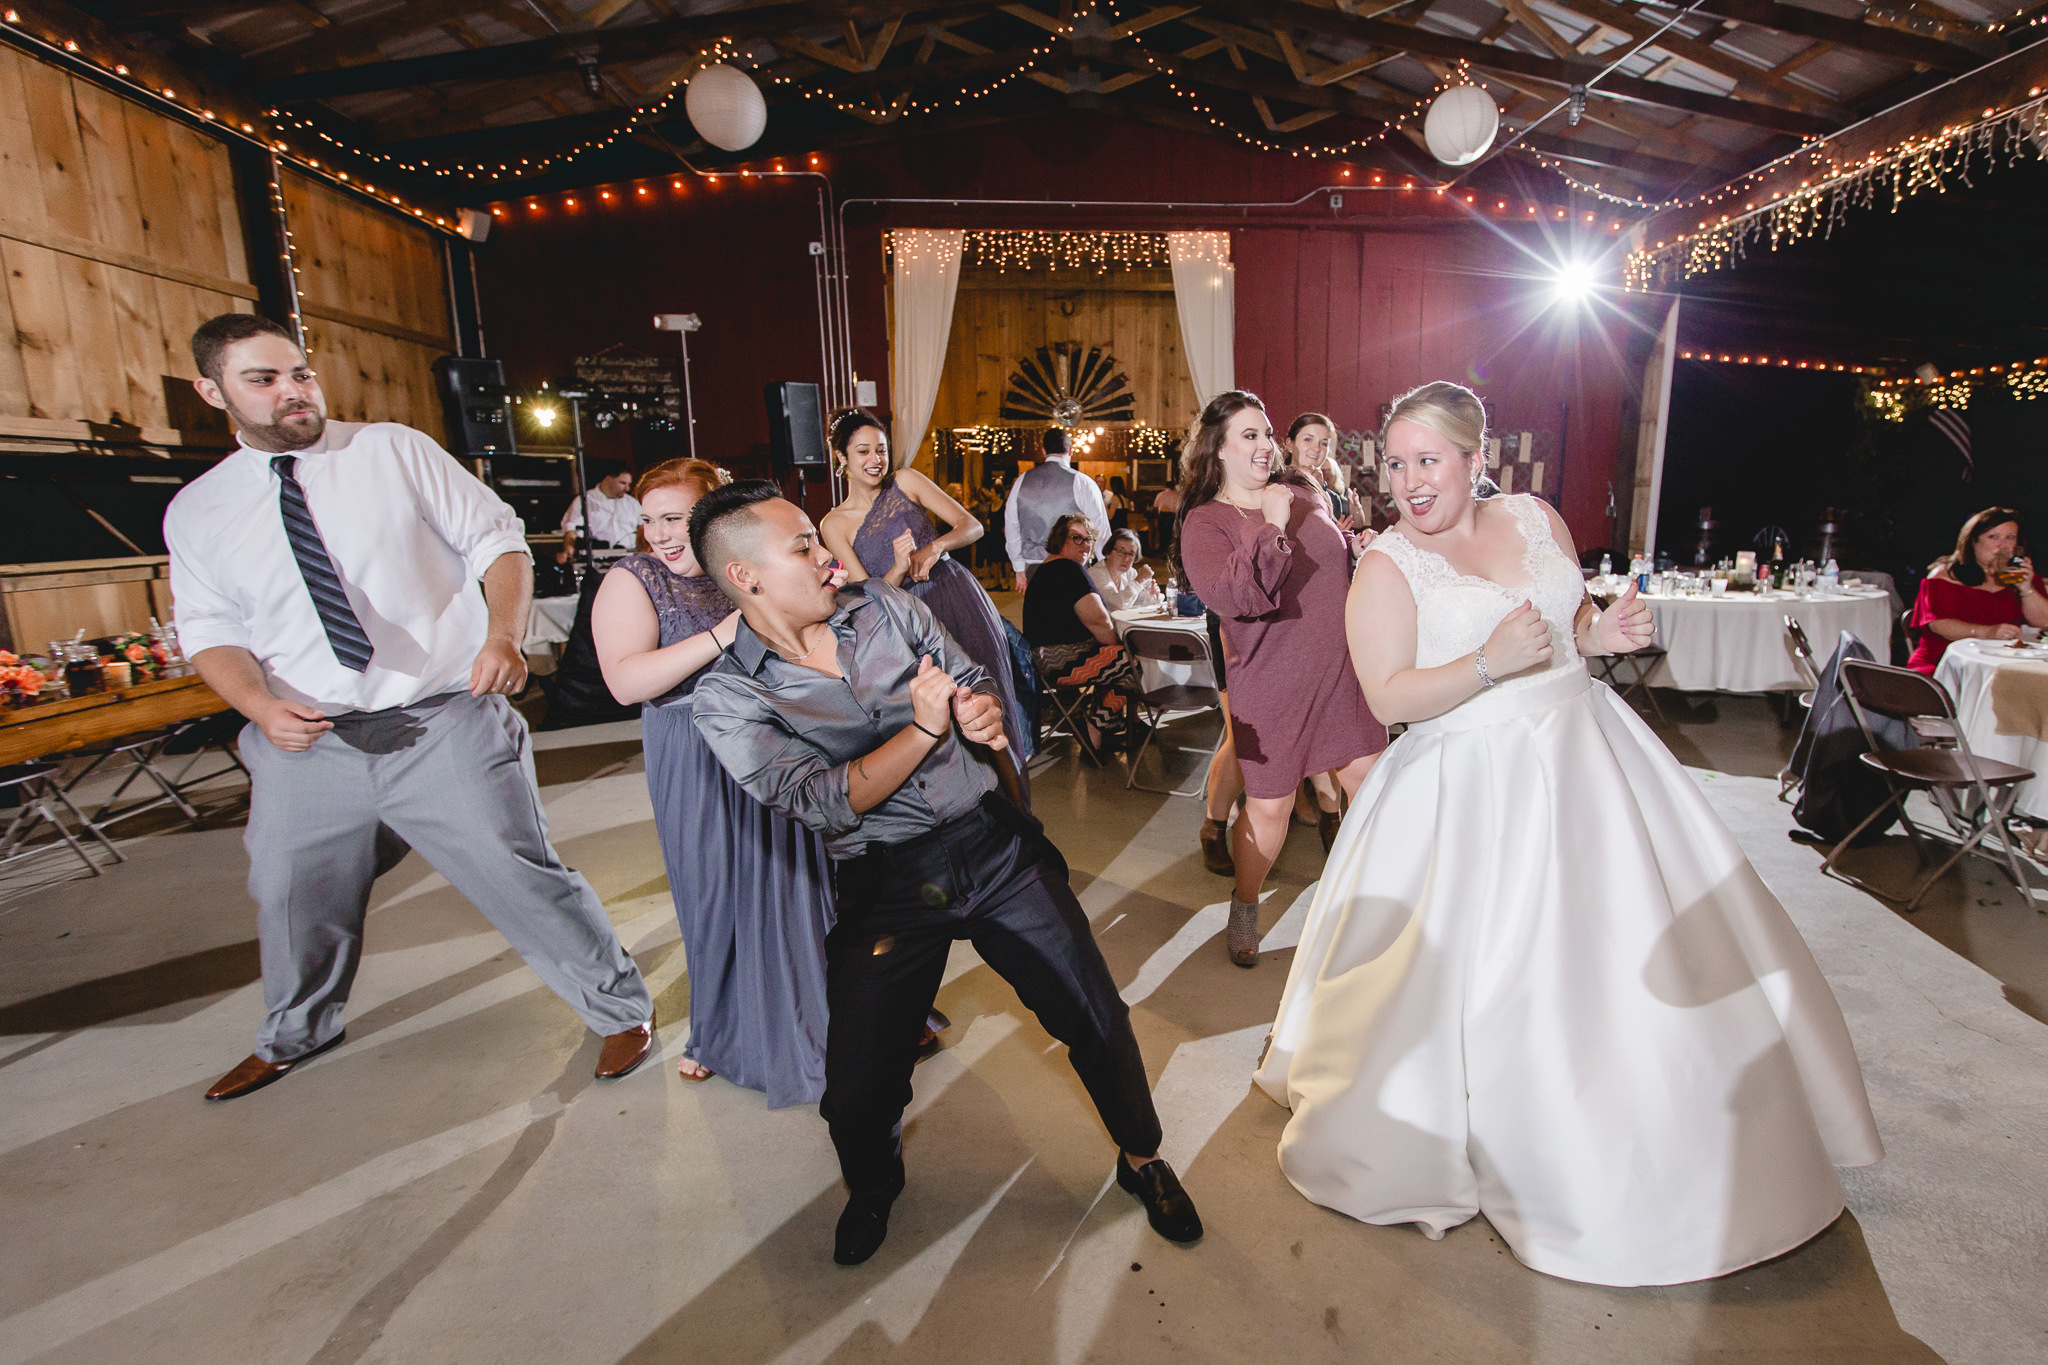 Guests dancing to the Wobble at a Barn at Soergel Hollow wedding reception